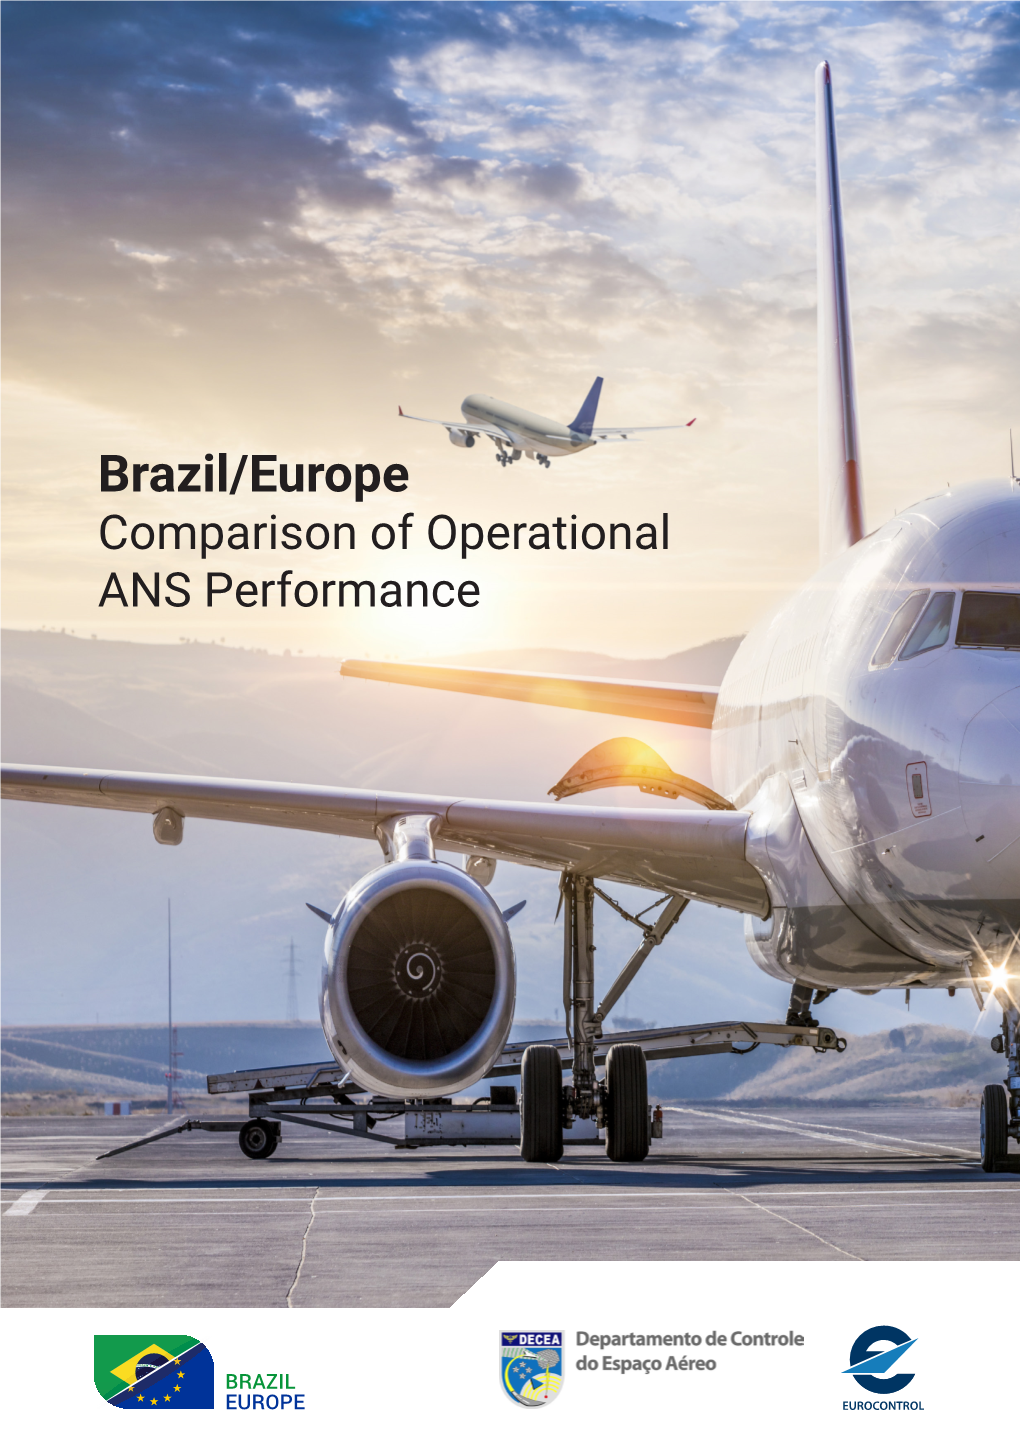 Brazil/Europe Comparison of Operational ANS Performance